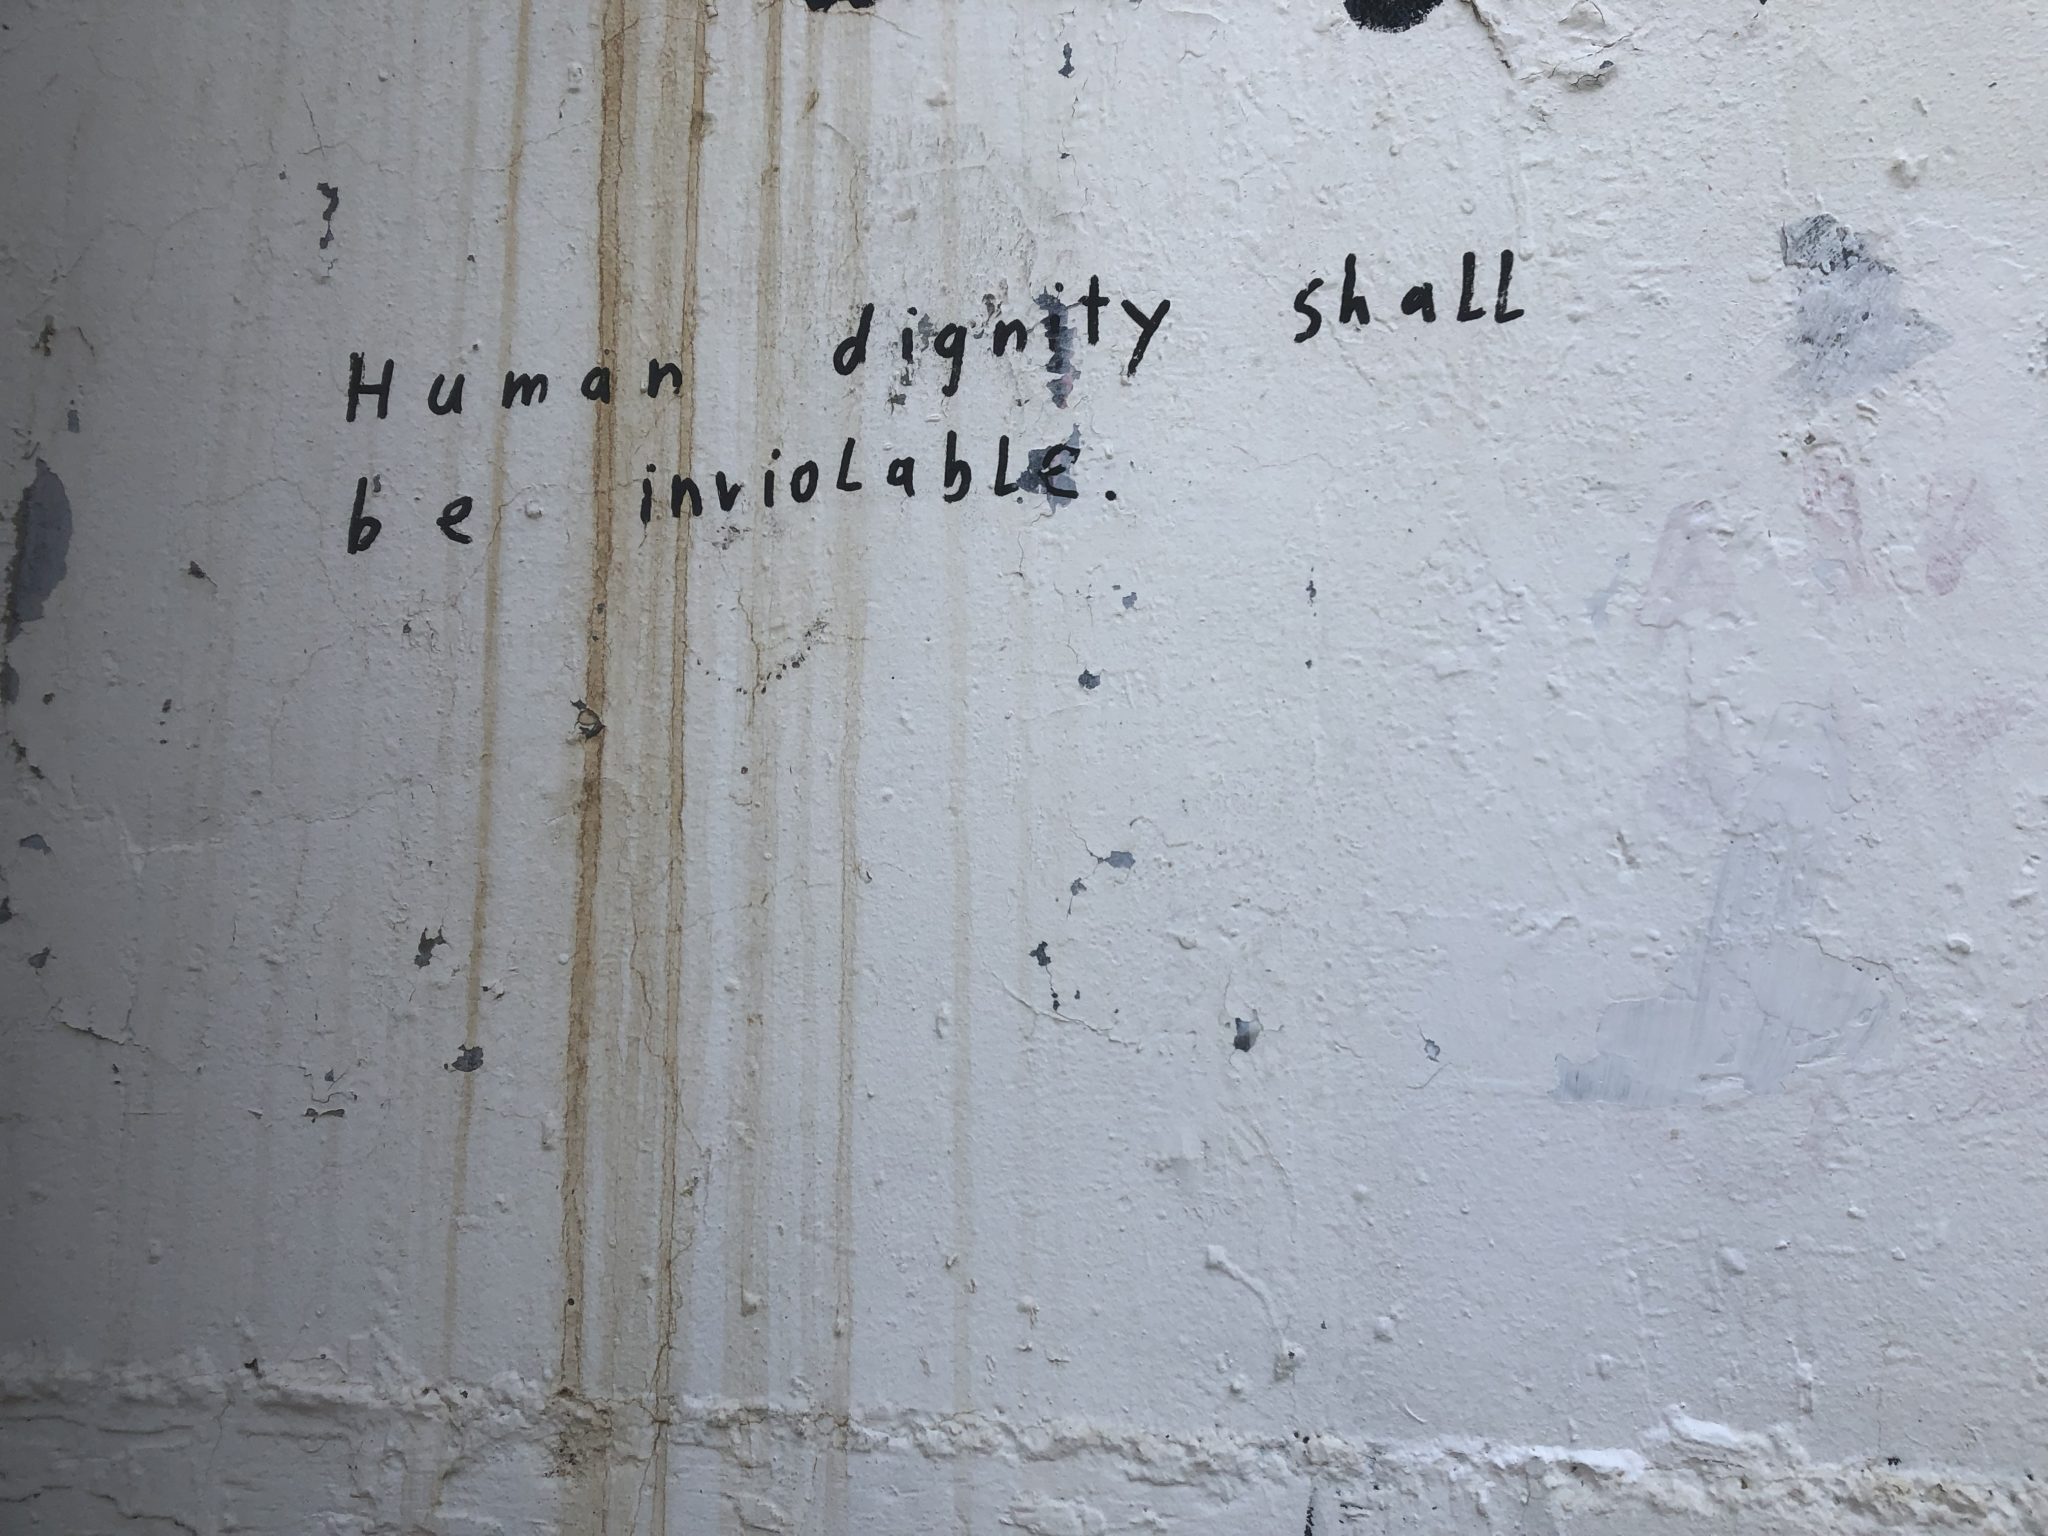 Graffiti outside Aida Refugee Camp that reads "human dignity shall be inviolable"